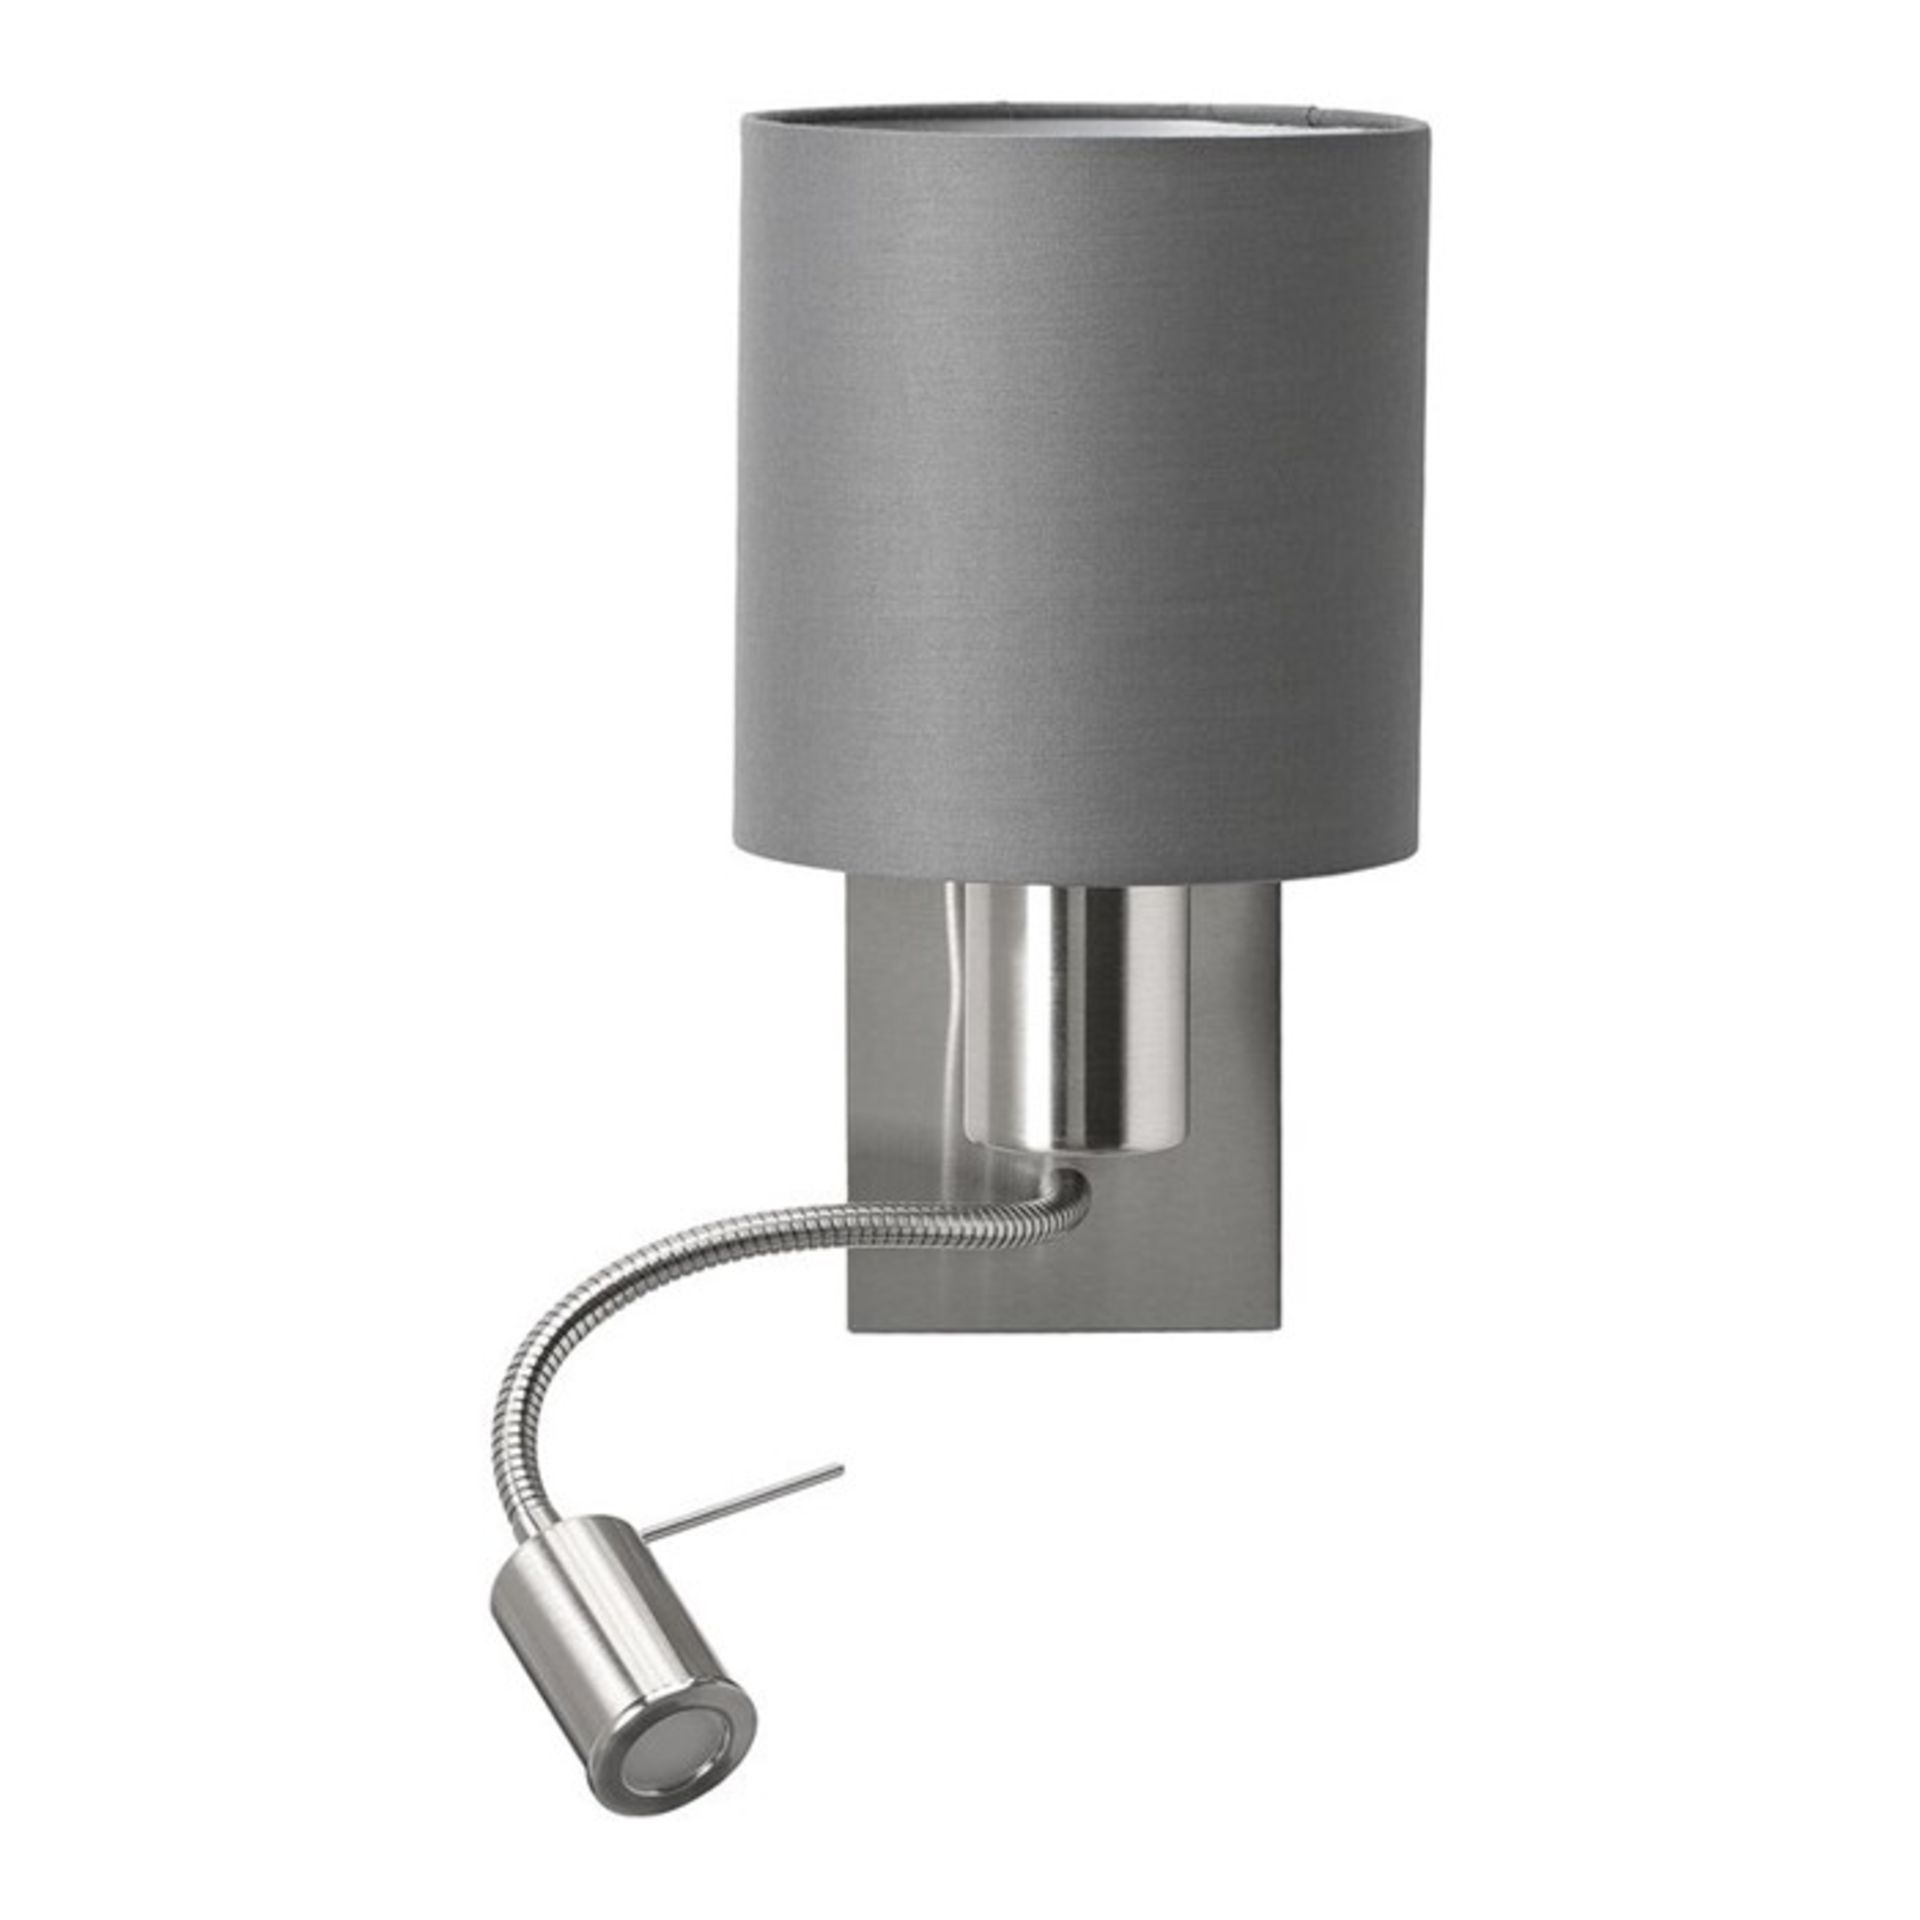 Zipcode Design ,Patience 2-Light LED Sconce Shade Colour: White -39.99 (RETURN) H091120 - 6/9 -